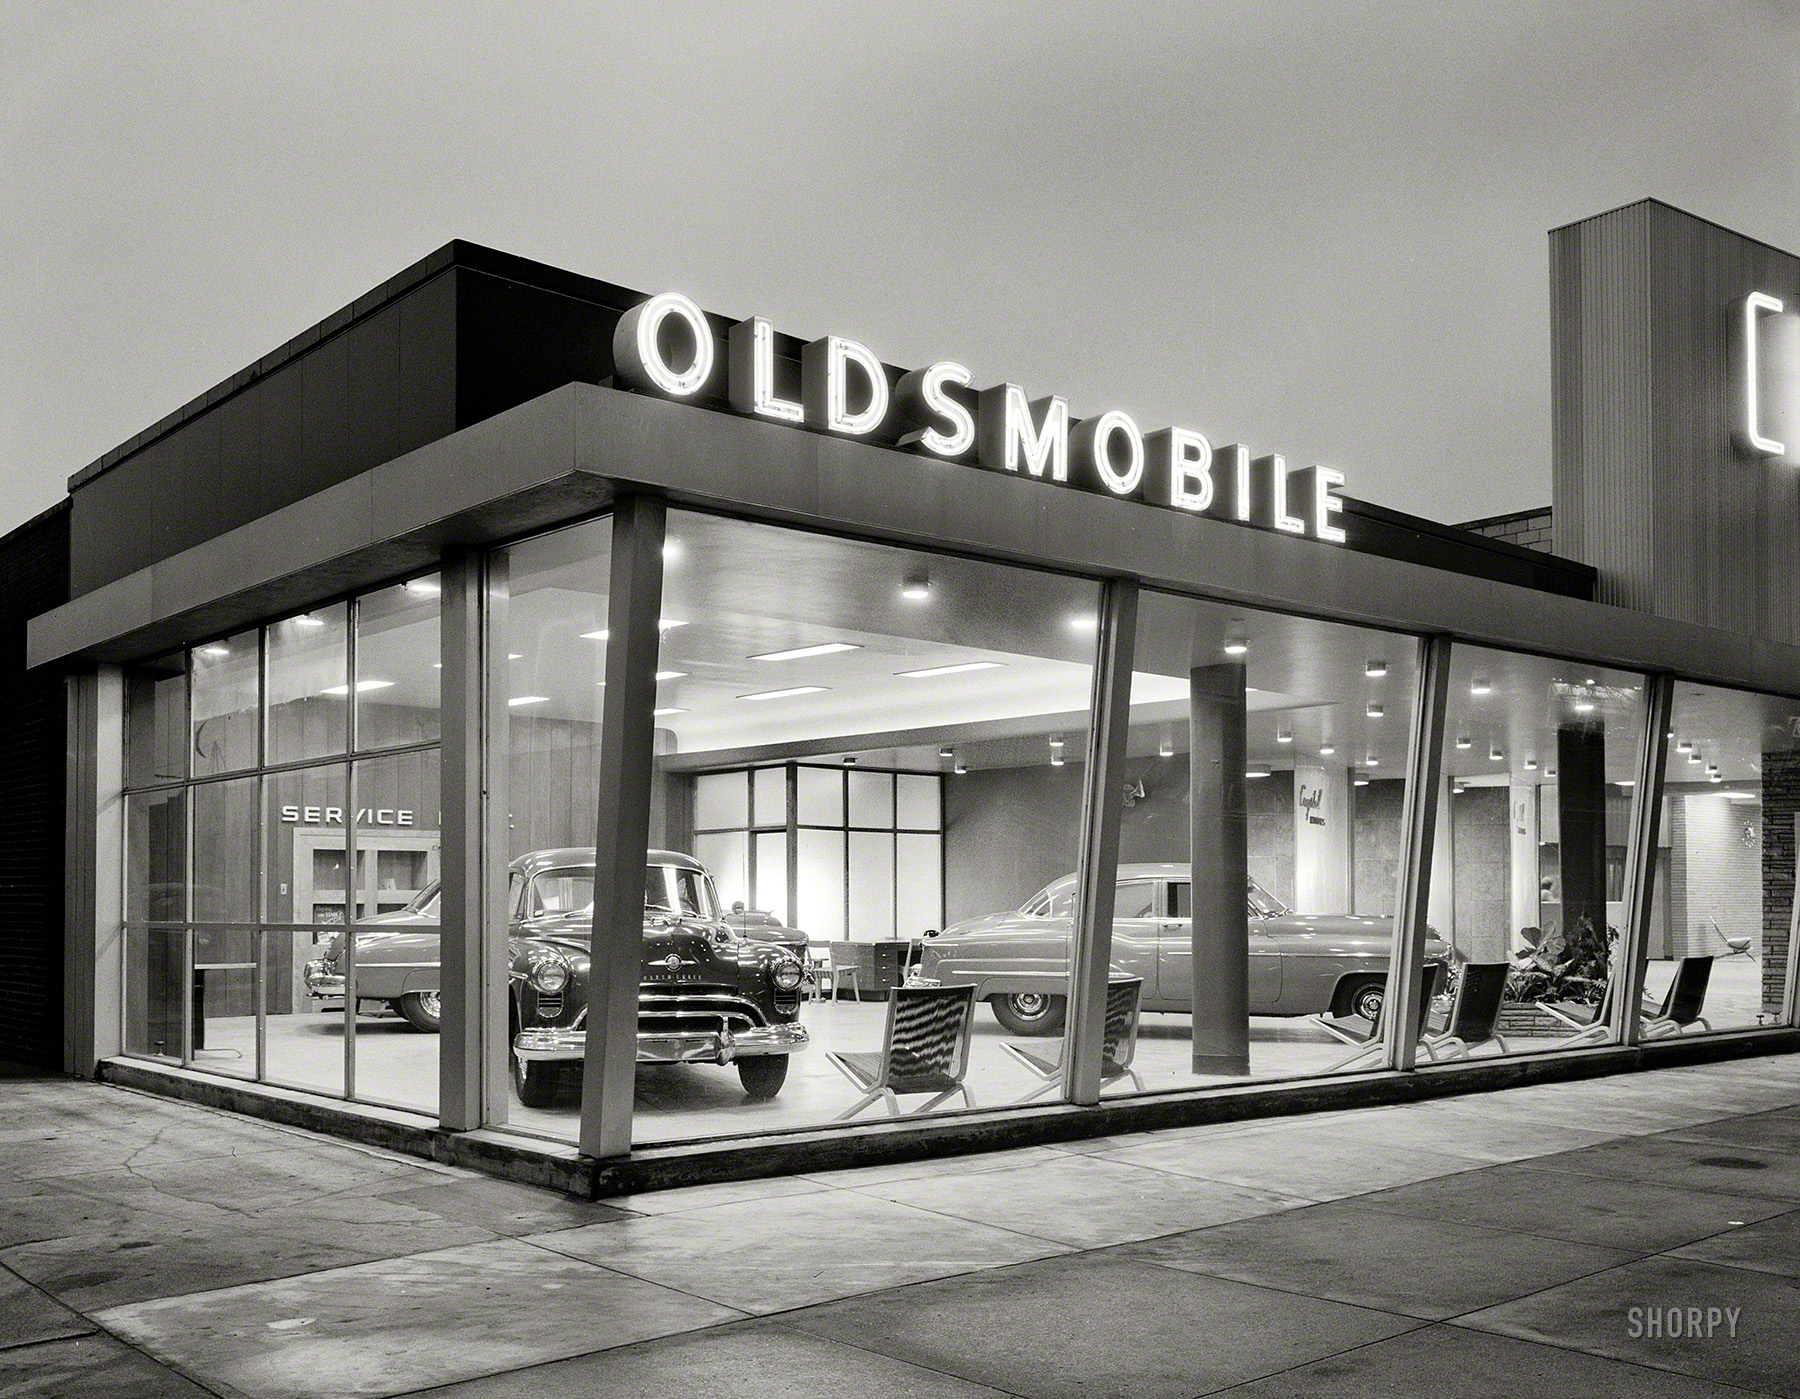 February 15, 1950. New York. "Crystal Motors, business at 5901 Bay Parkway, Brooklyn. Exterior II." On display: the "Futuramic" 1950 Oldsmobile. Large-format acetate negative by Gottscho-Schleisner. View full size.